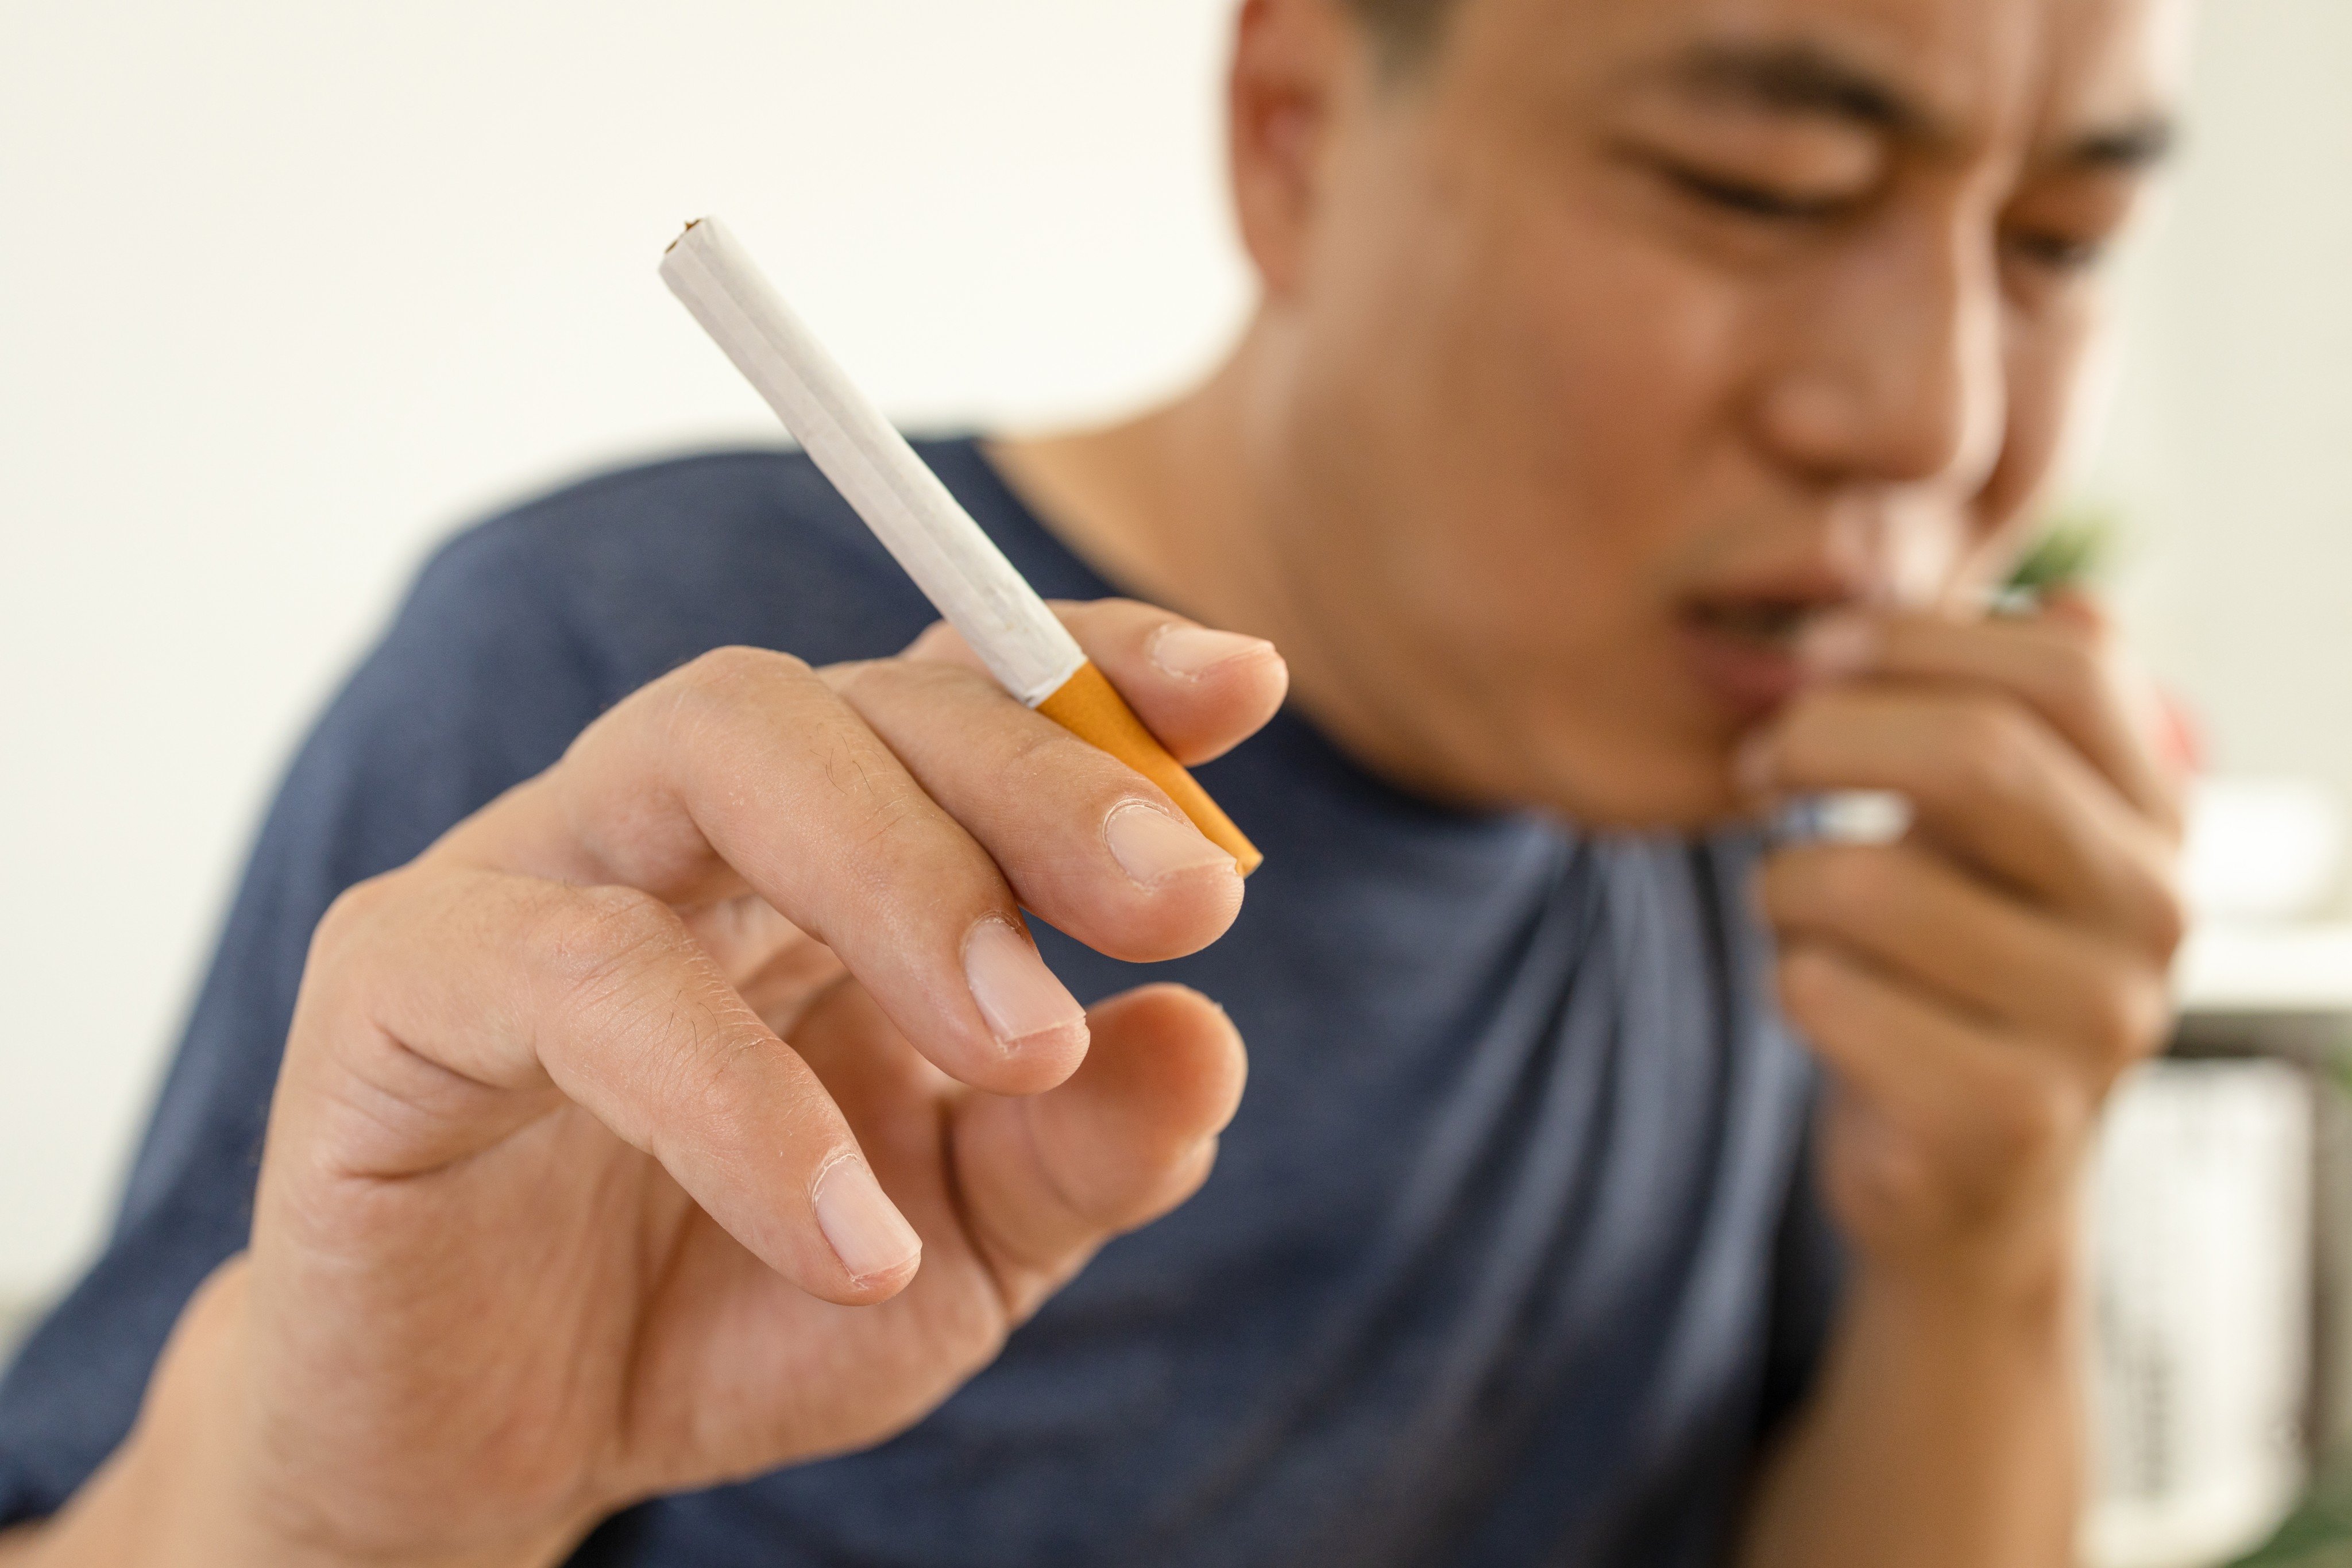 Smoking shrinks your brain, increasing the risk of dementia. However, quitting the habit, even aged 60, substantially reduces the risk. Photo: Shutterstock